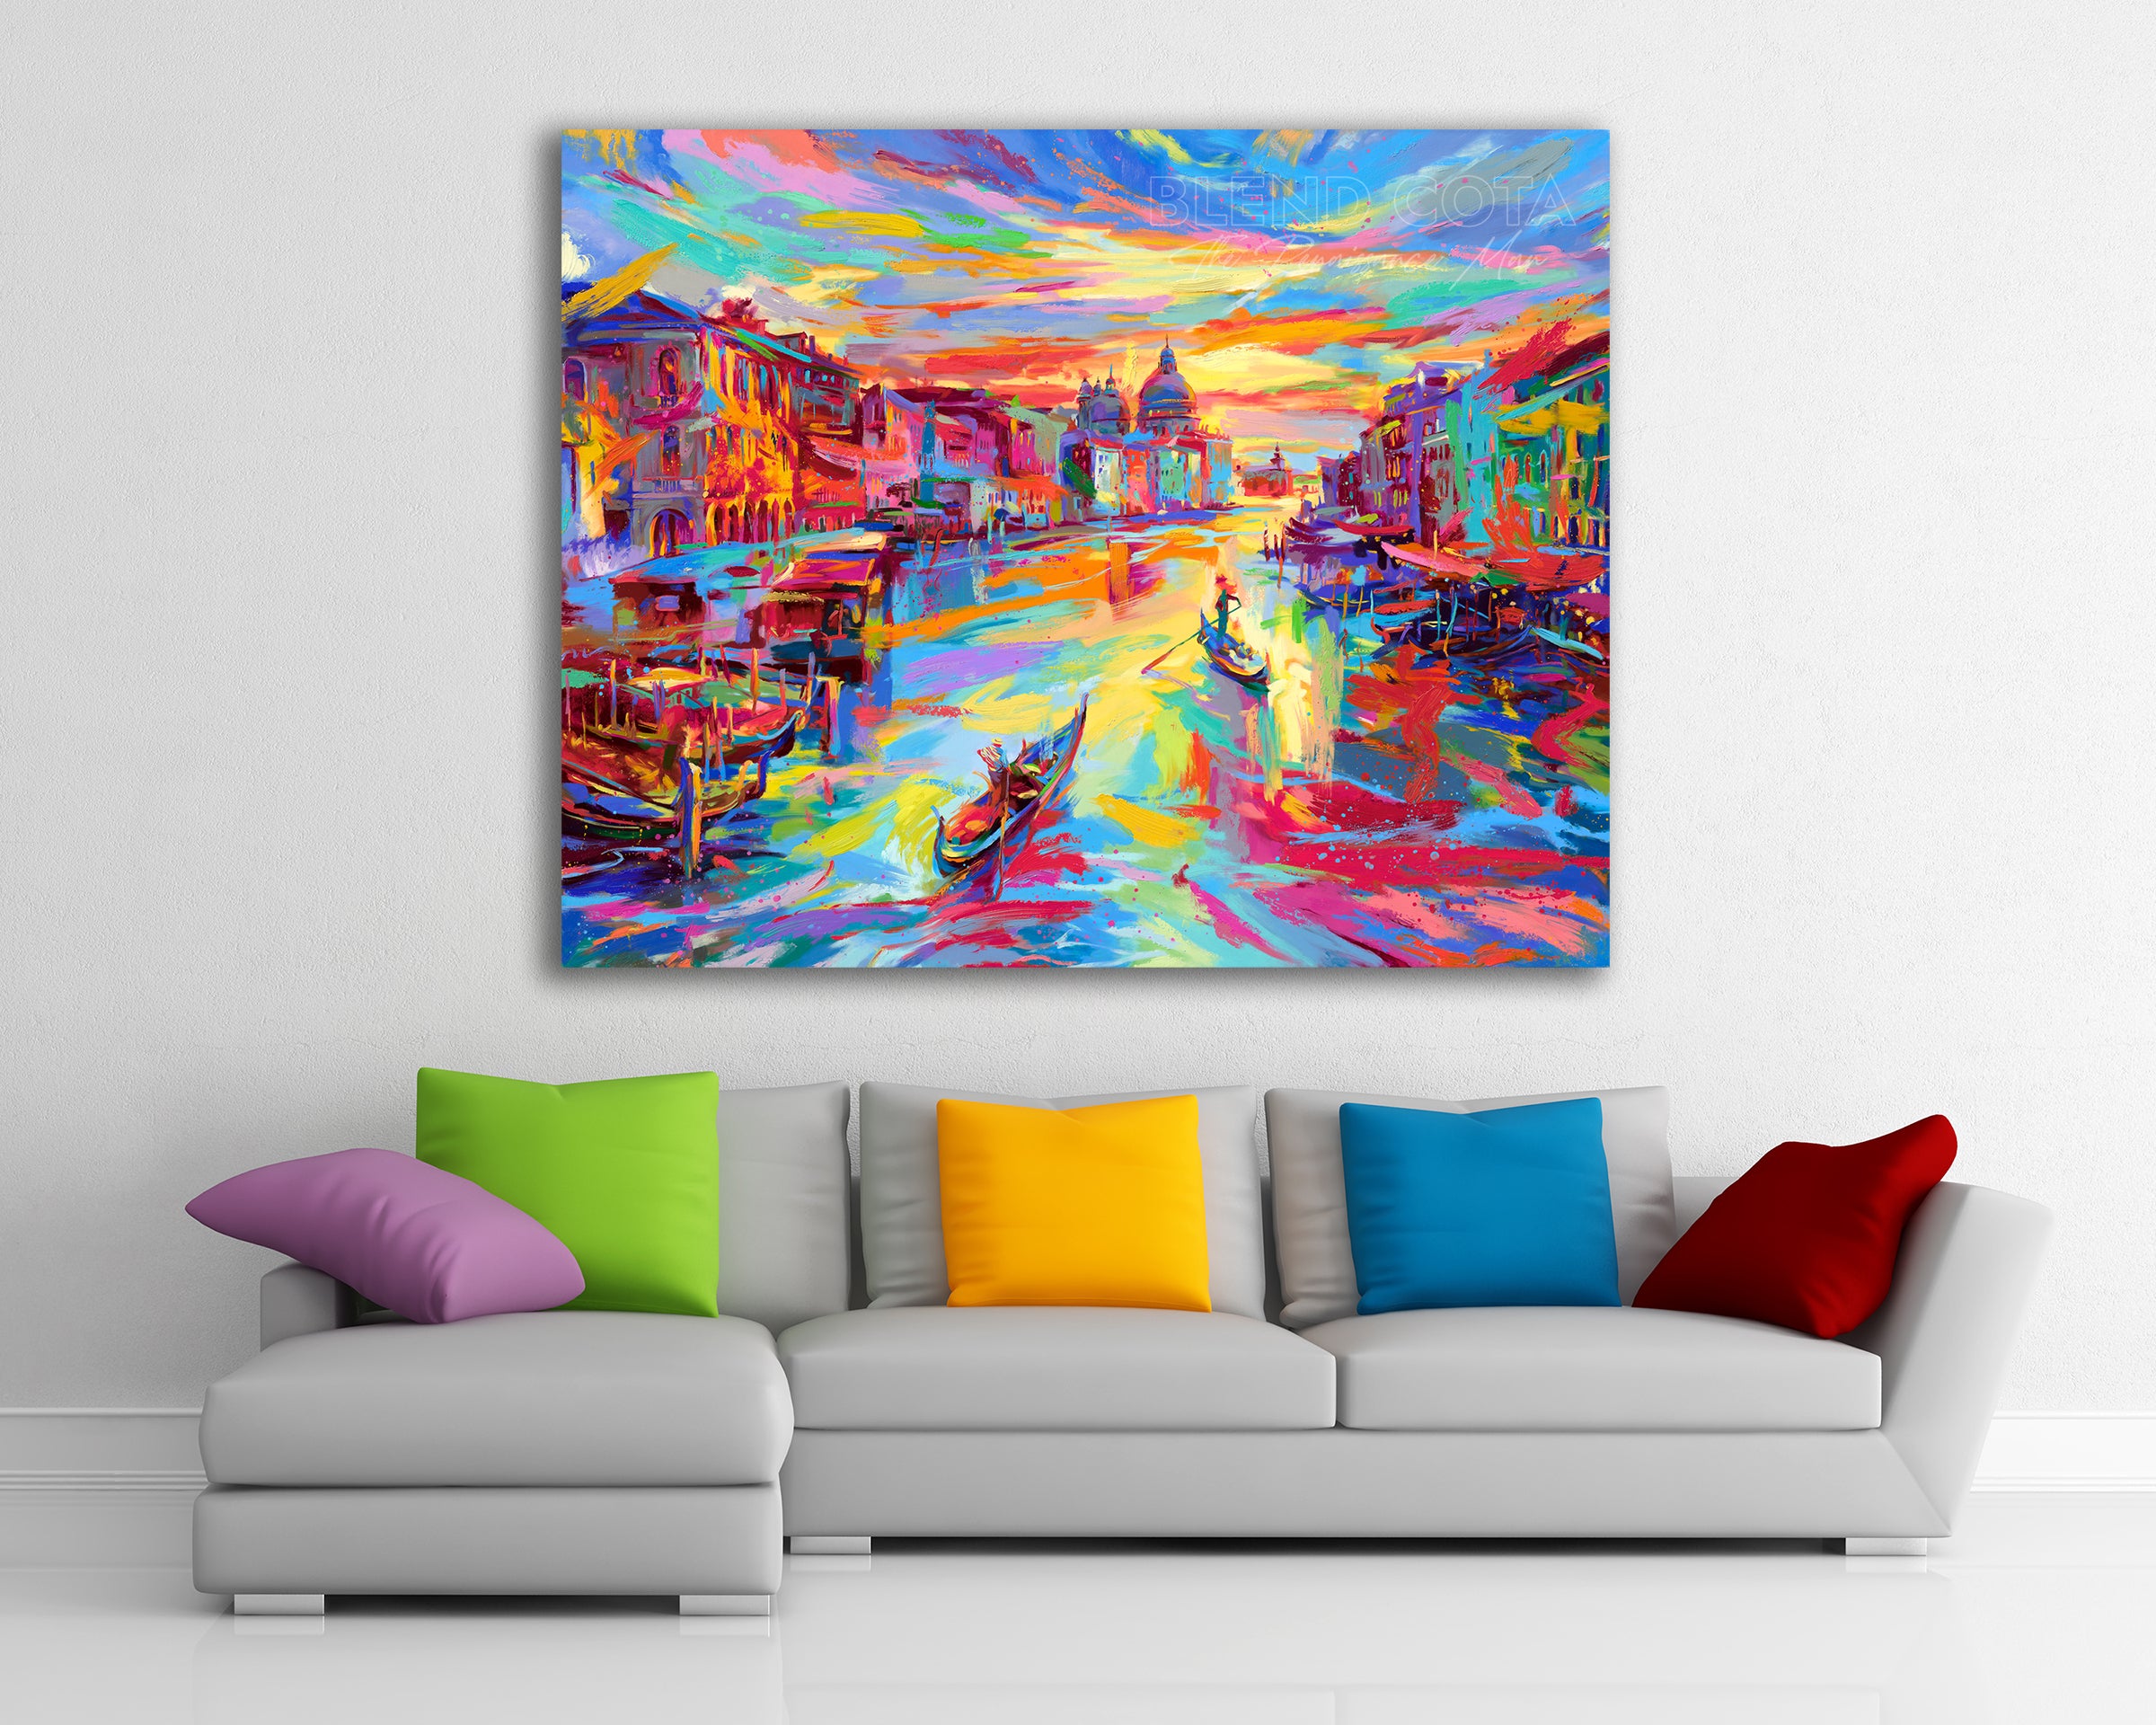 Venice colour painting - The City of Water painted by Blend Cota Original oil painting from Blend Cota Studios 